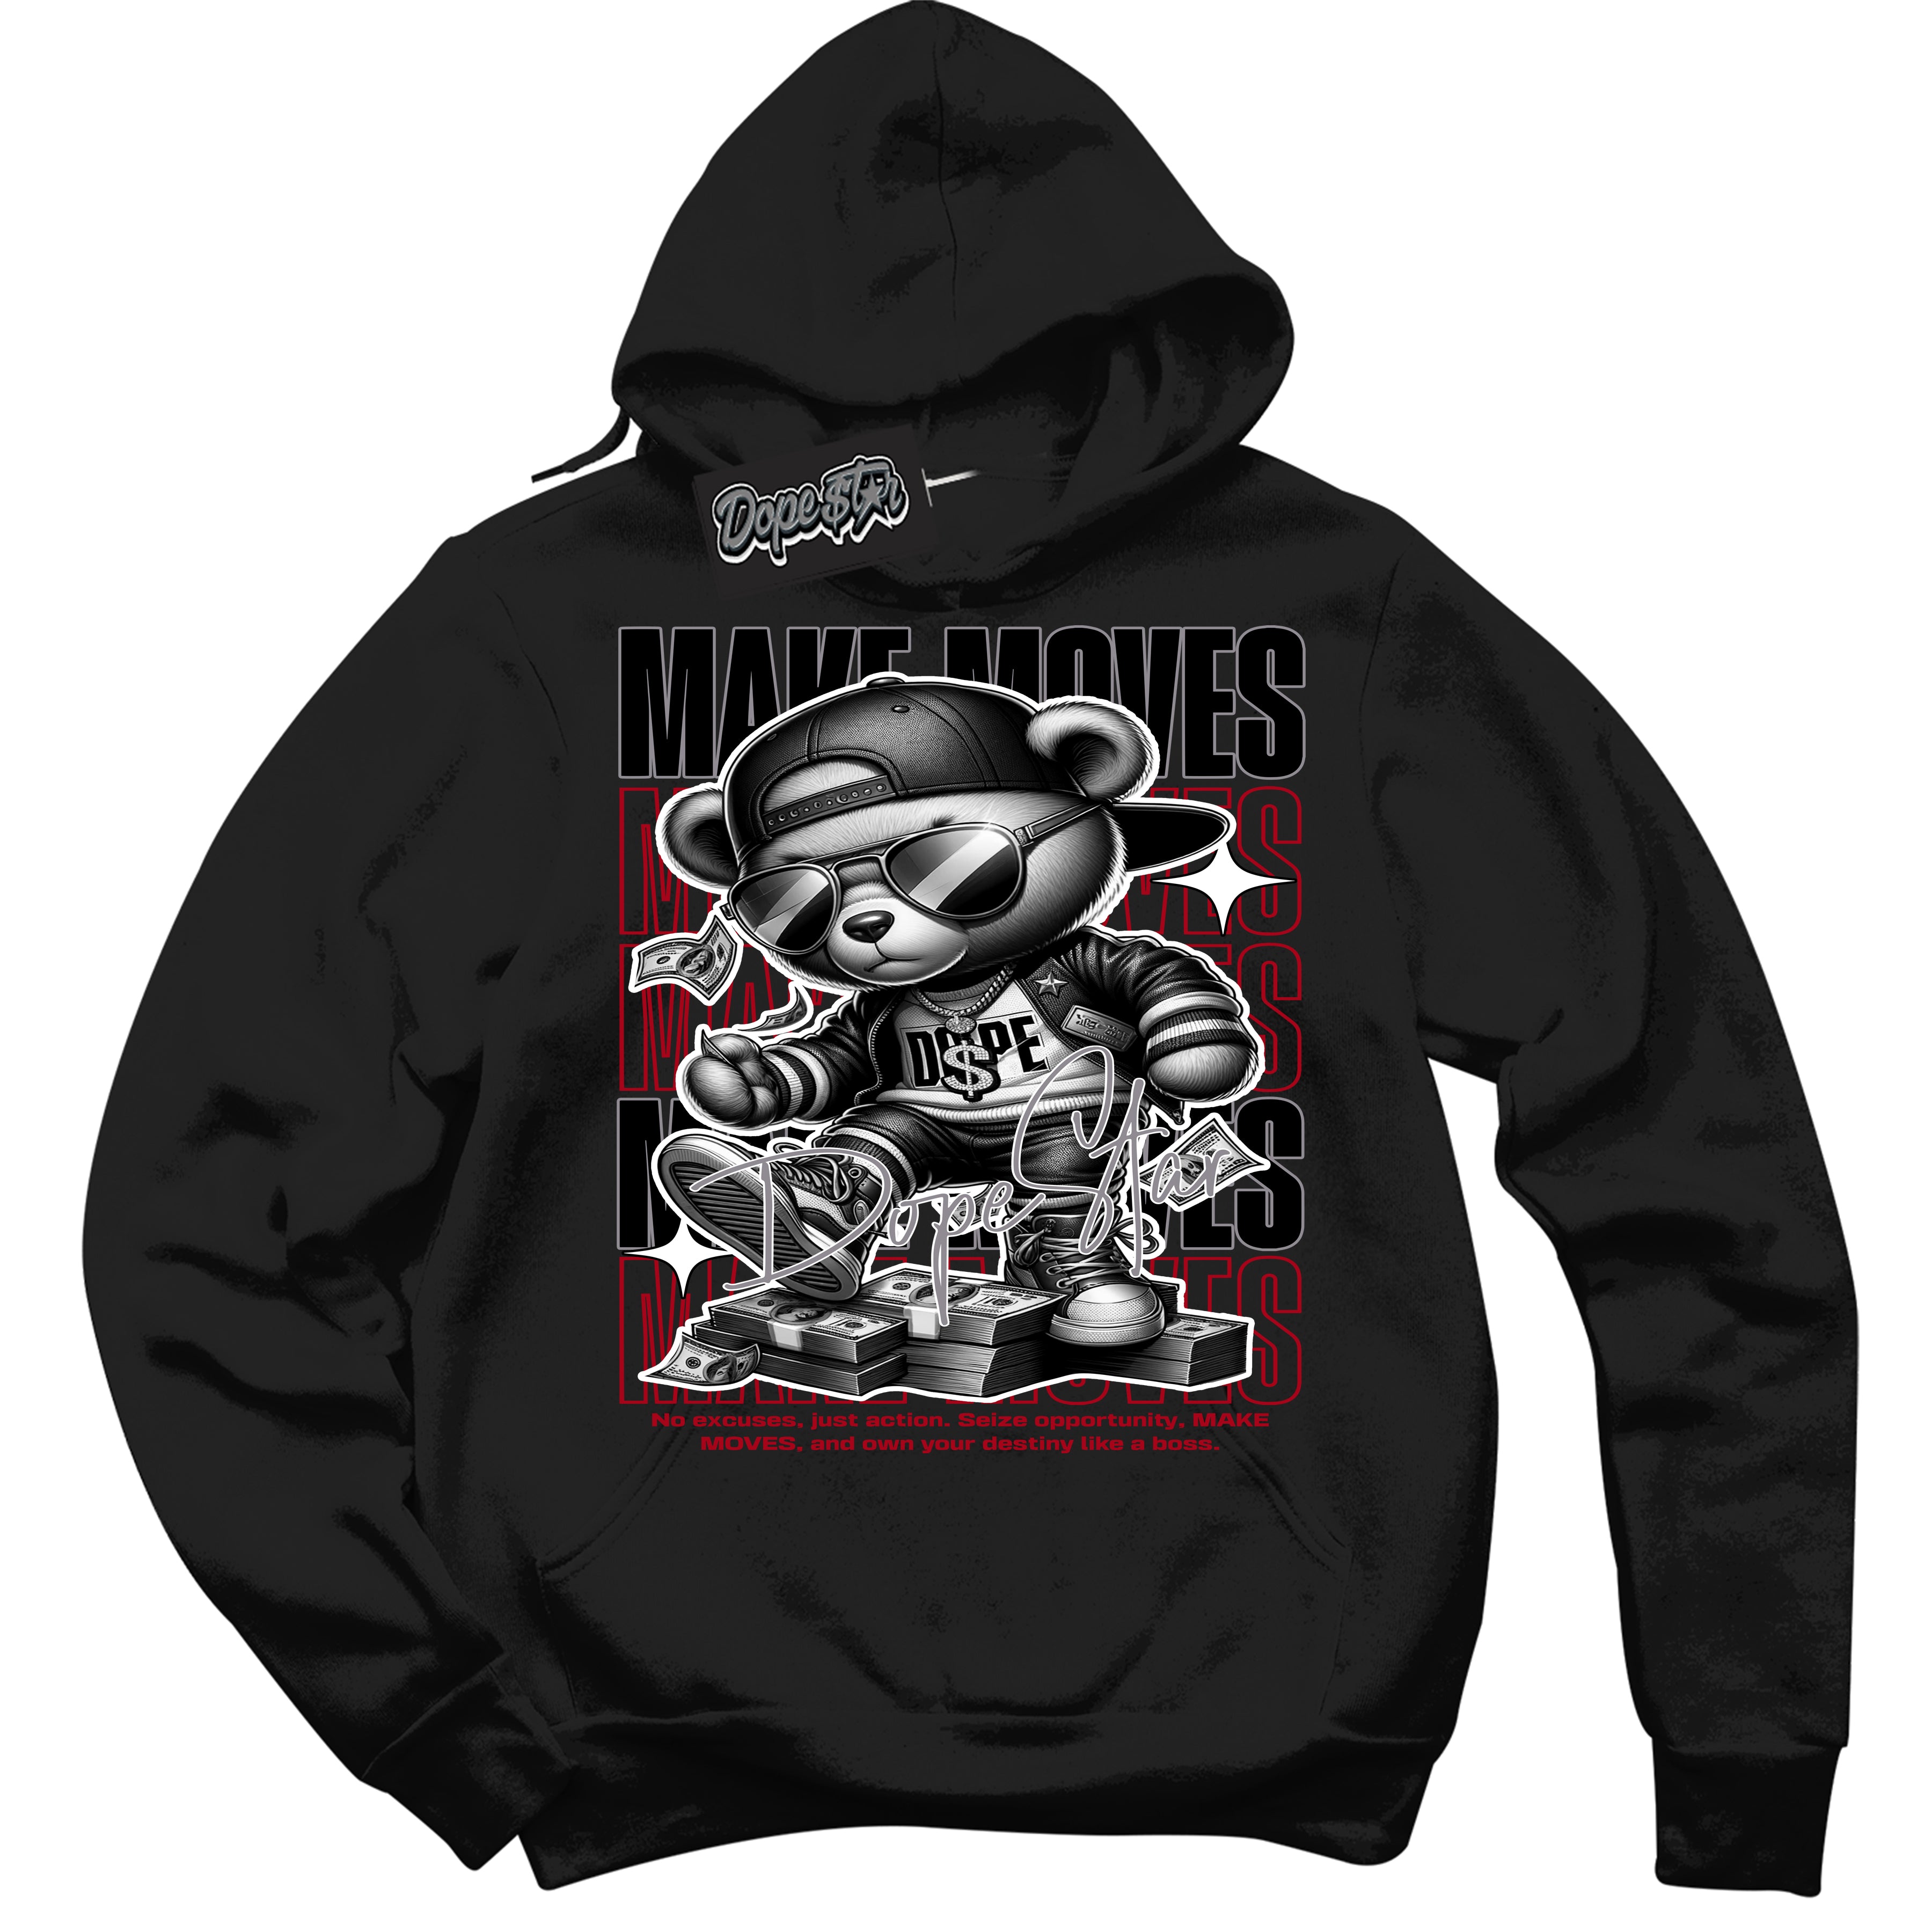 Cool Black Hoodie with “ Makin Moves ”  design that Perfectly Matches Bred Reimagined 4s Sneakers.